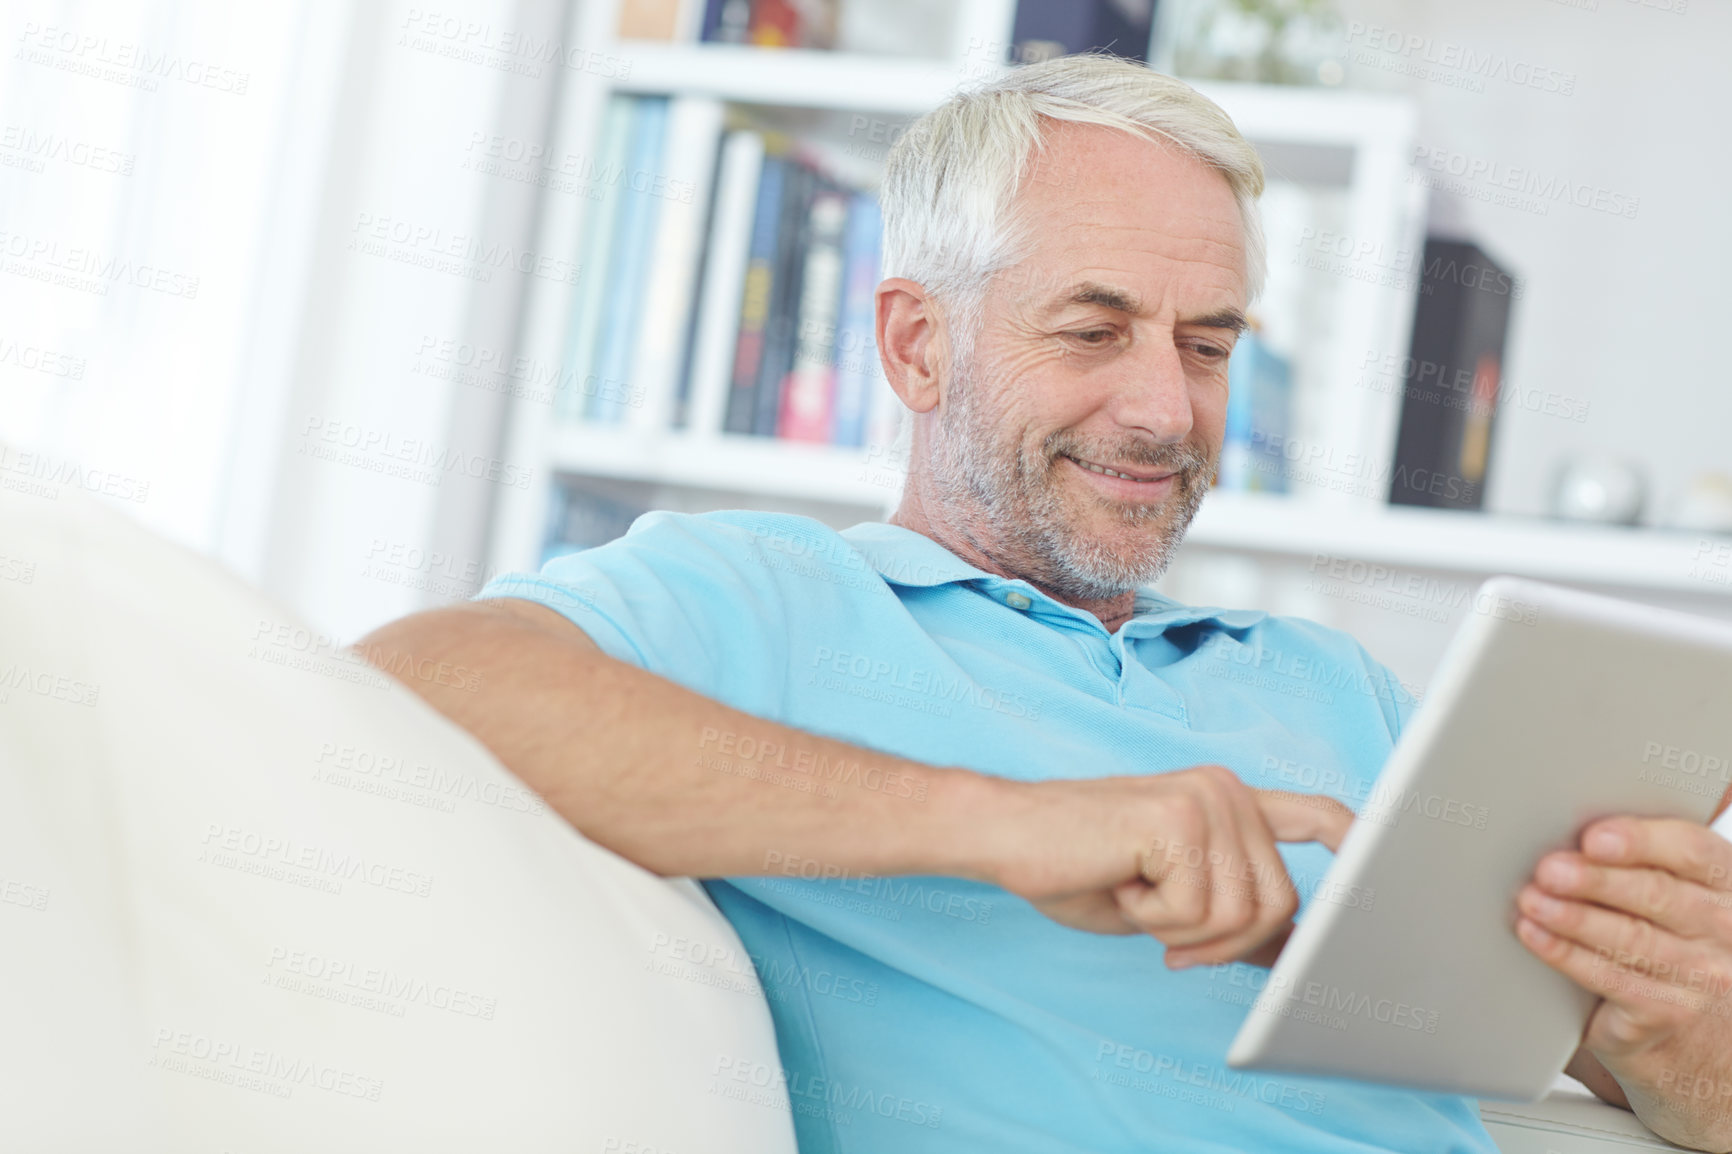 Buy stock photo Mature man, digital tablet or relax on sofa in house, home or apartment living room on social media app or internet game. Smile, happy or retirement person on technology crossword puzzle or streaming